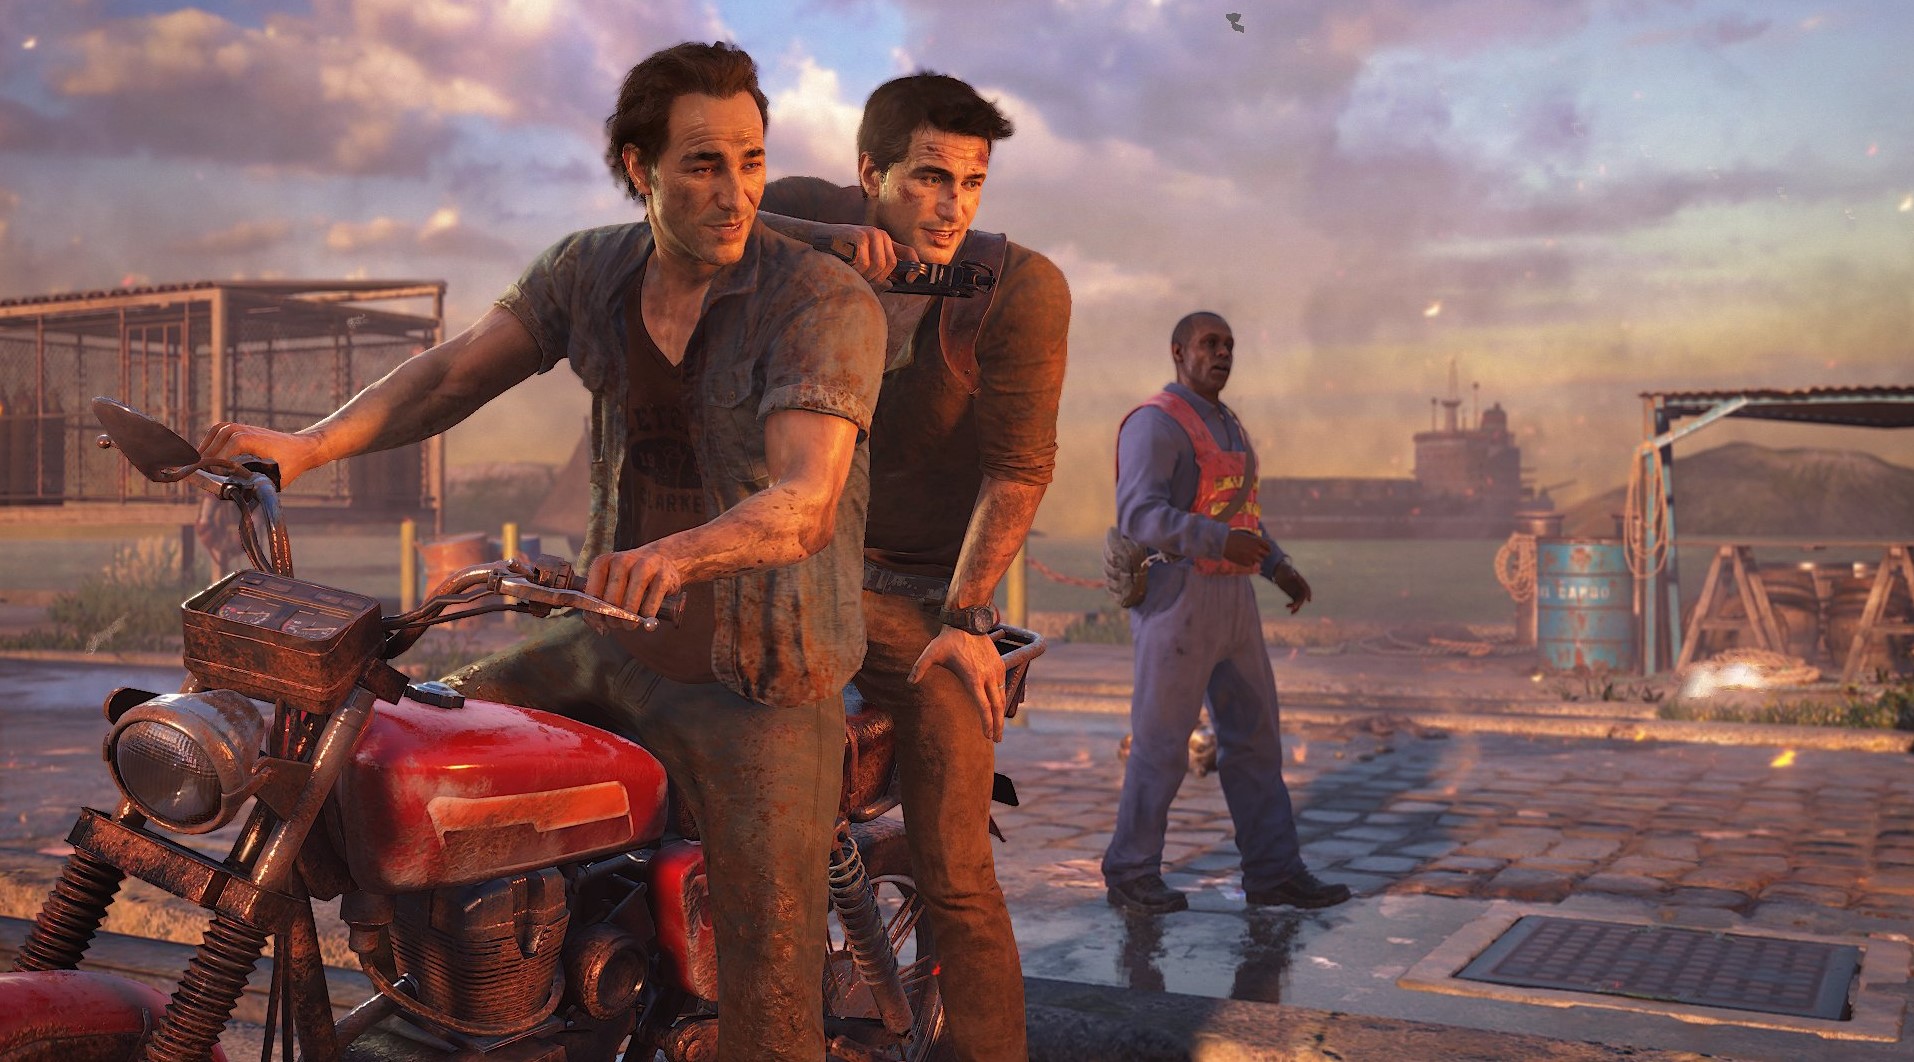 Uncharted 4 for PC and PS5 has been rated, suggesting a release soon